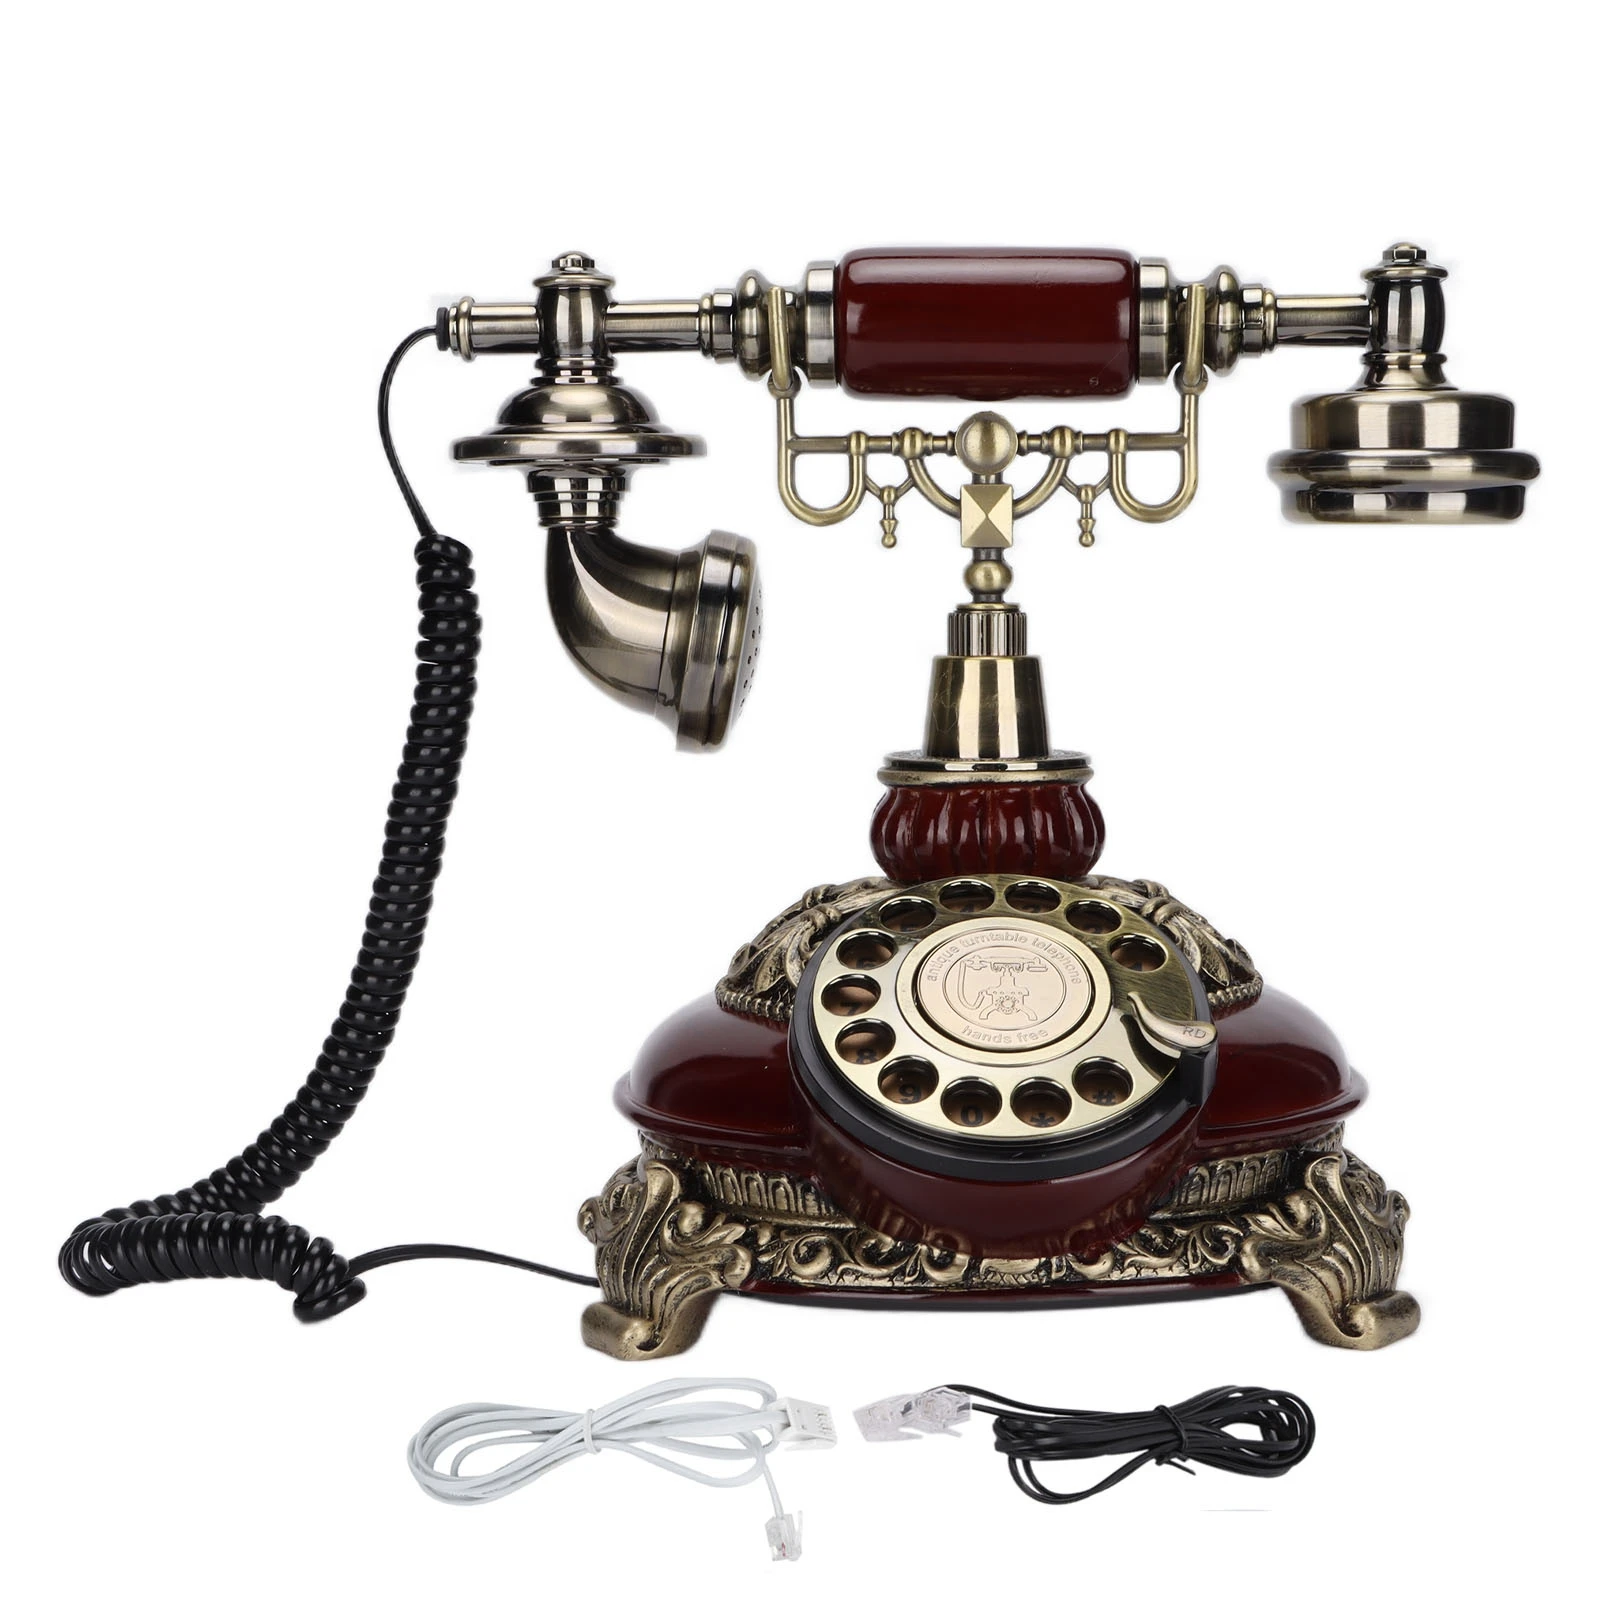 

Royal Vintage Telephone Antique Desk Rotary Dial Handset Corded Phone for Home Office Cafe Bar Decoration(Bronze)